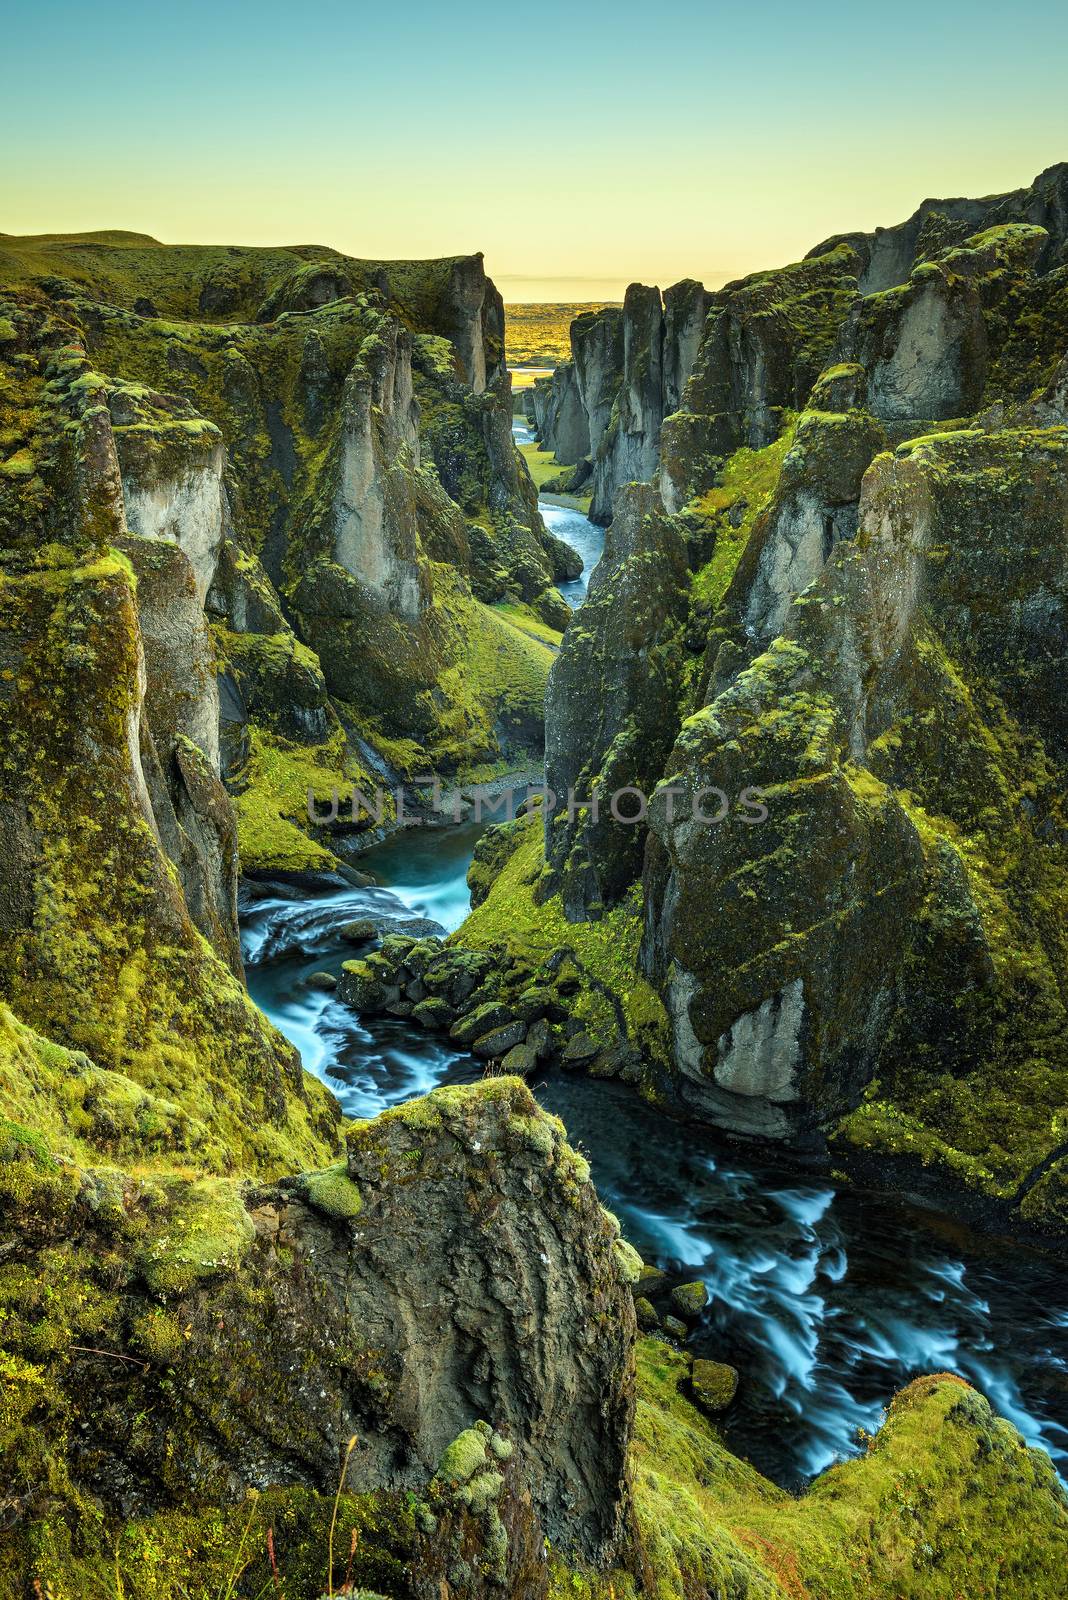 Fjadrargljufur canyon and river in south east Iceland by nickfox